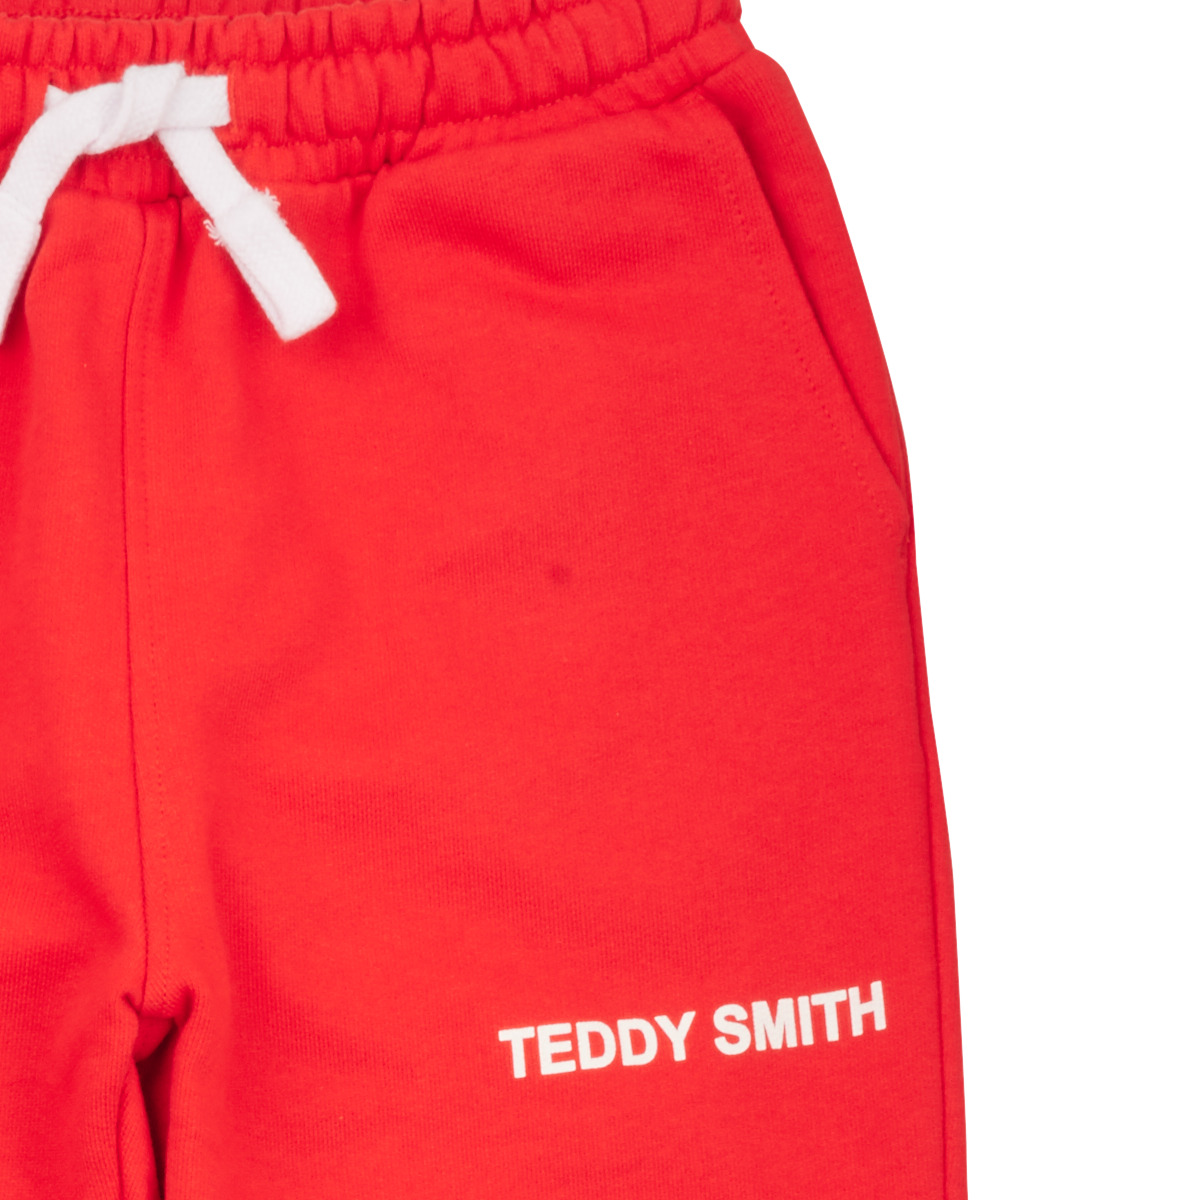 Teddy Smith Rose P-REQUIRED G JR 6LWXZjnf